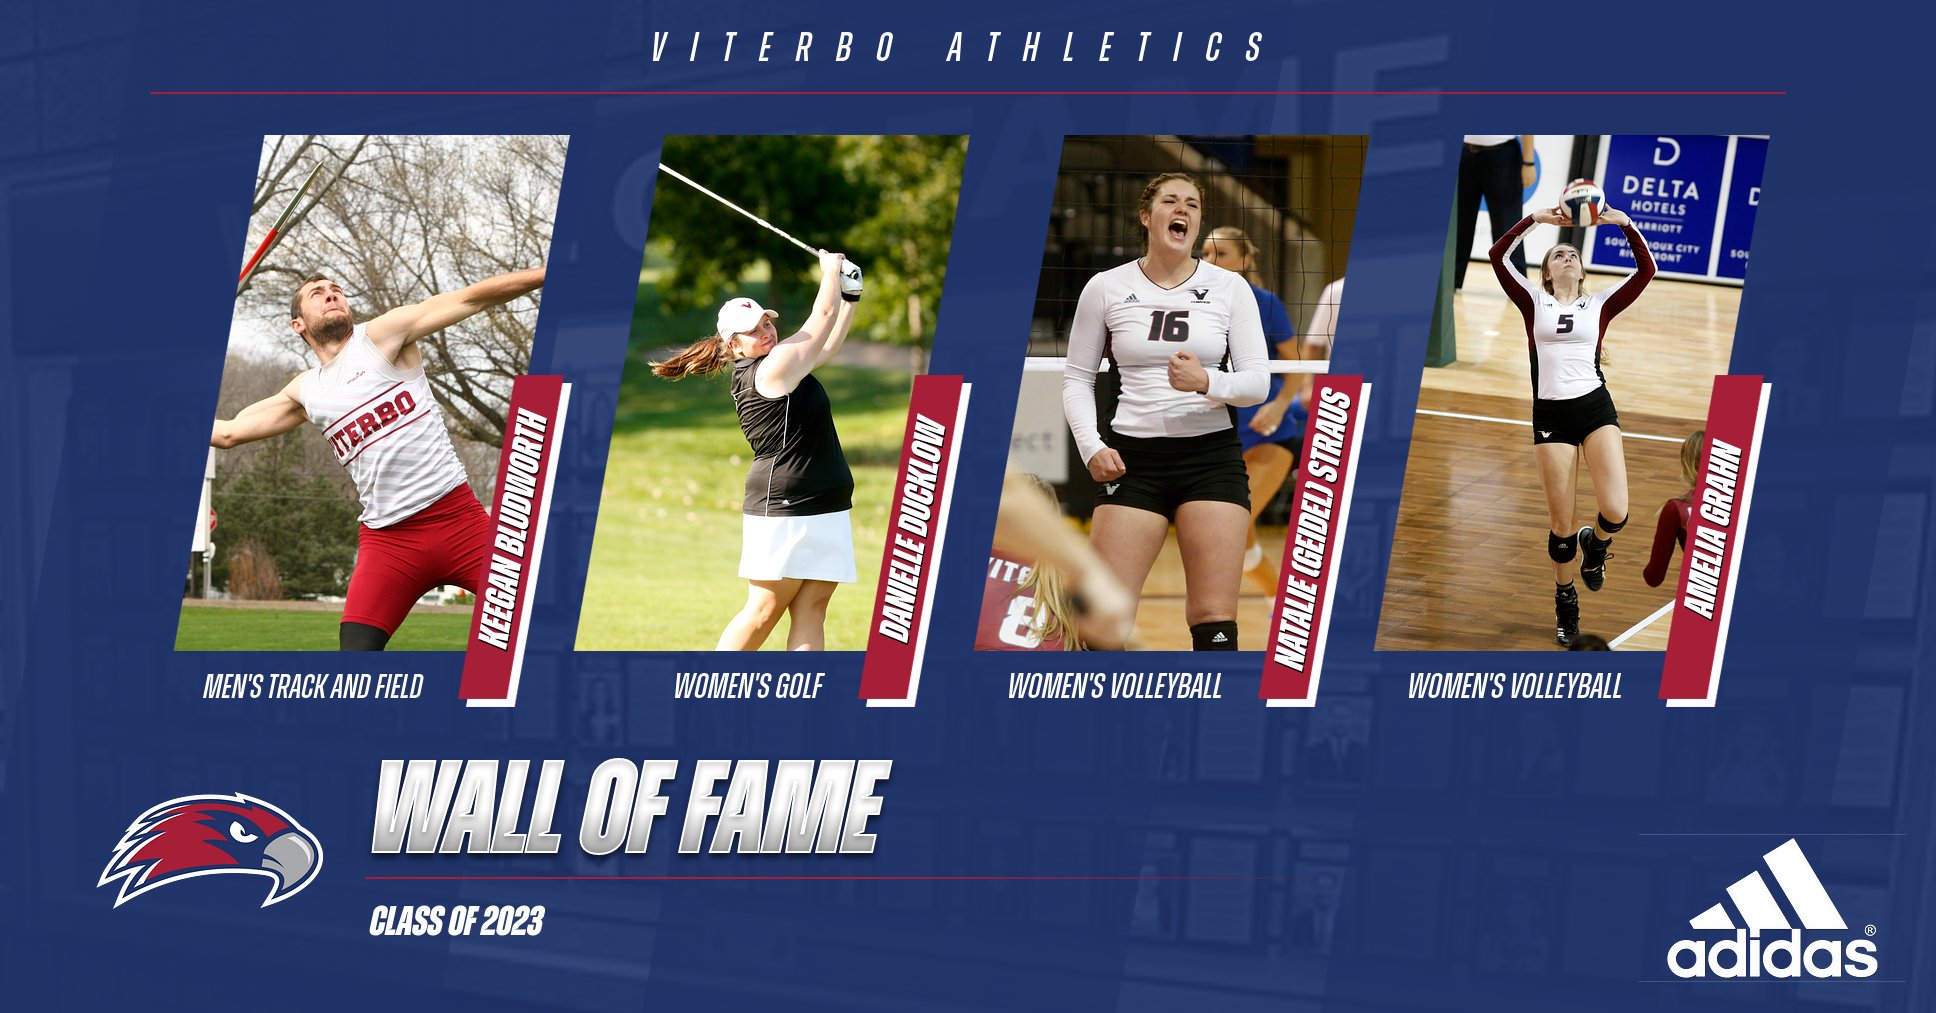 Viterbo Athletics Announces 2023 Wall of Fame Class